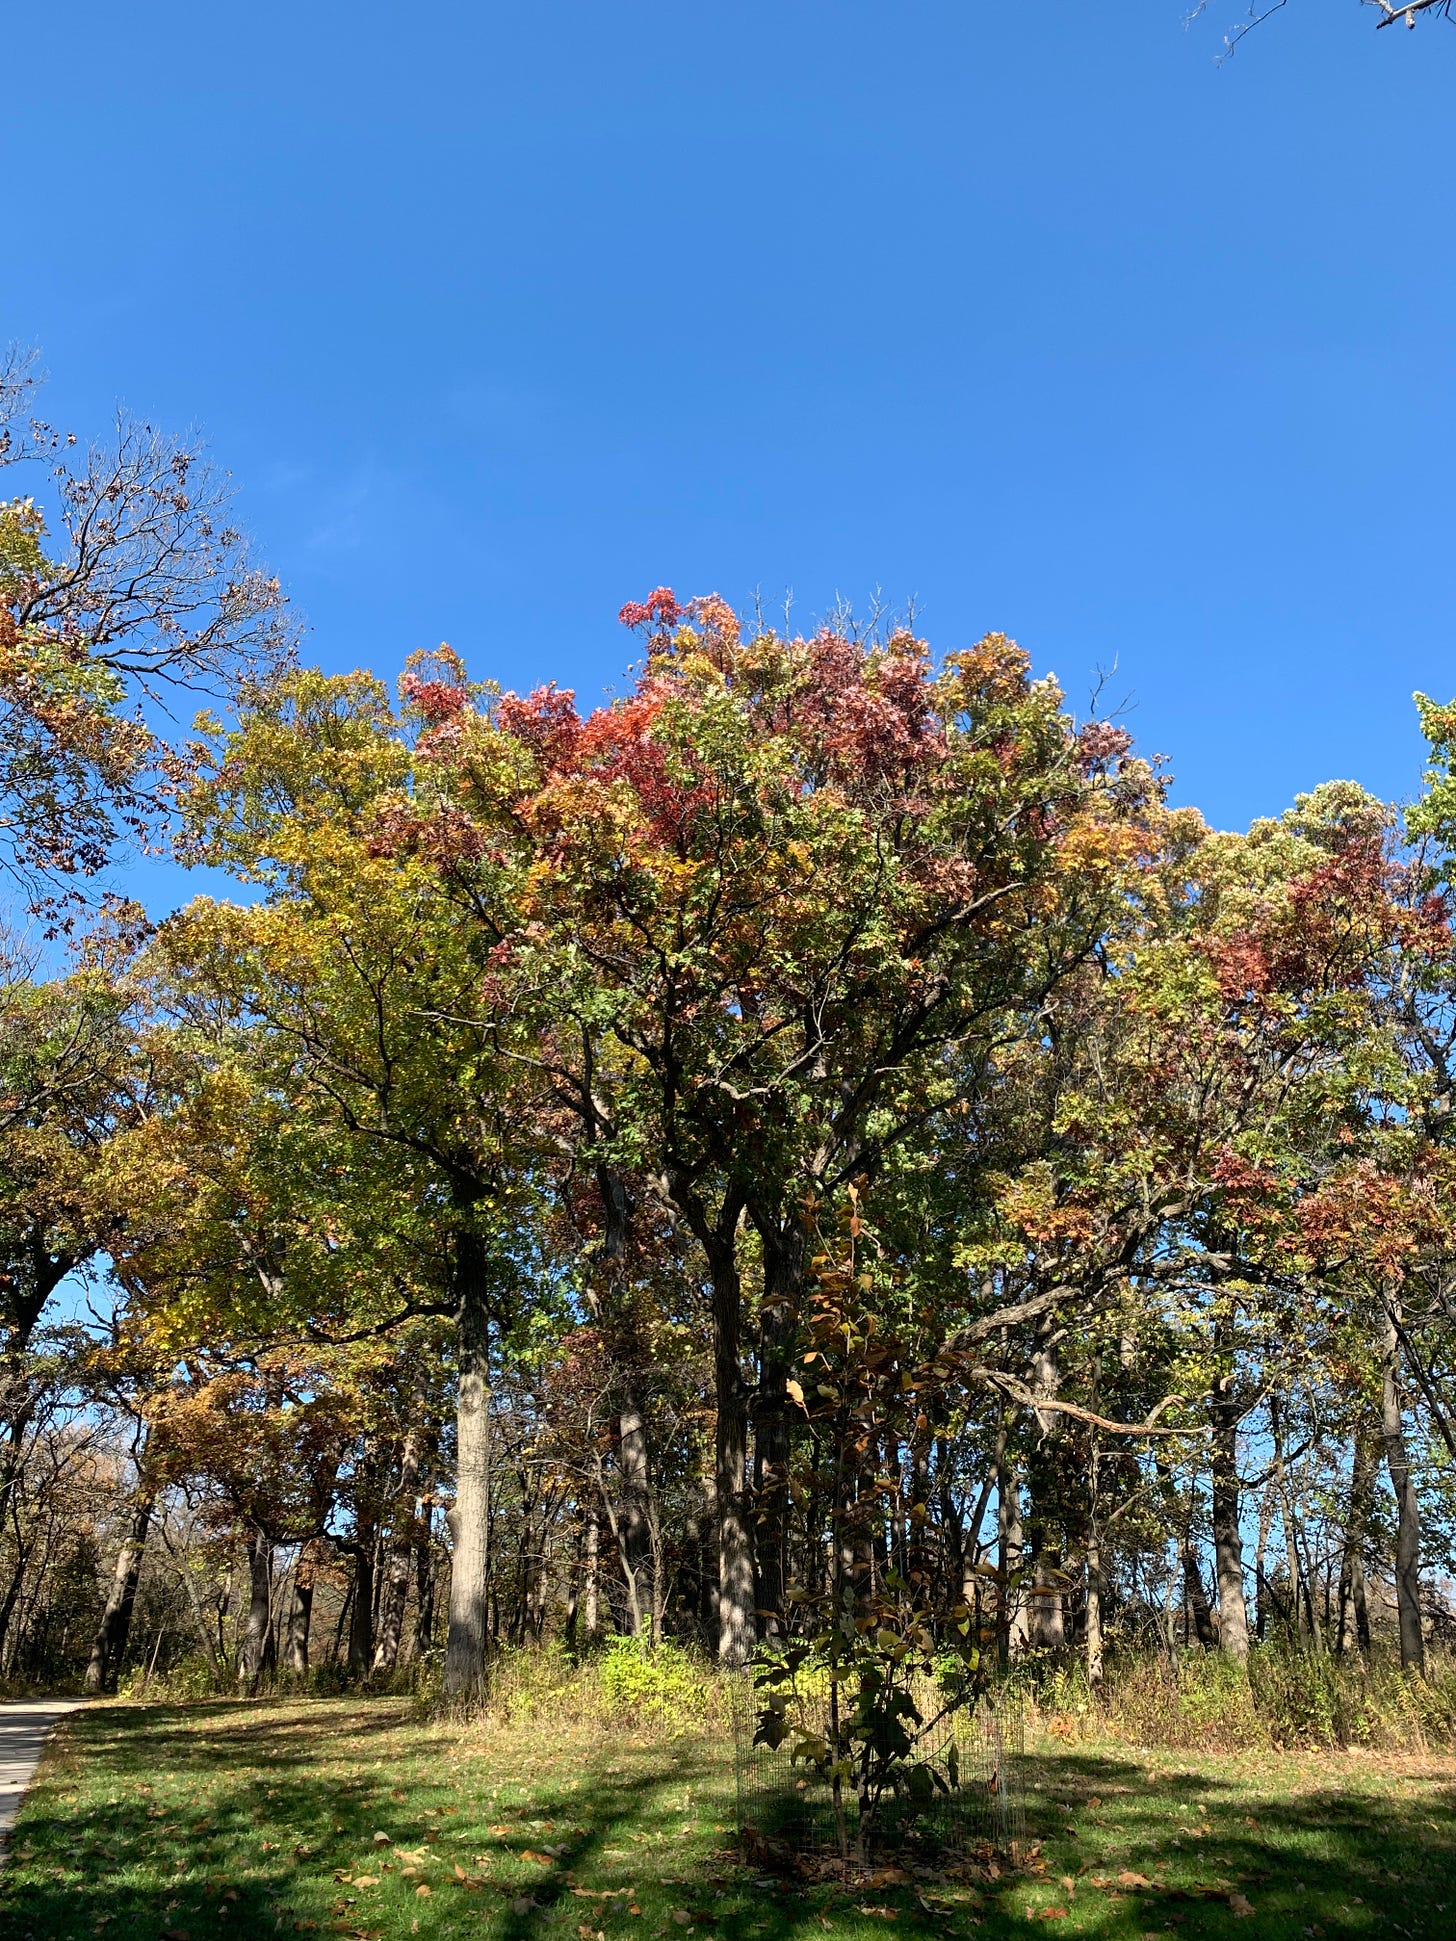 A group of trees colored green, red, and orange with a bright blue sky behind them.